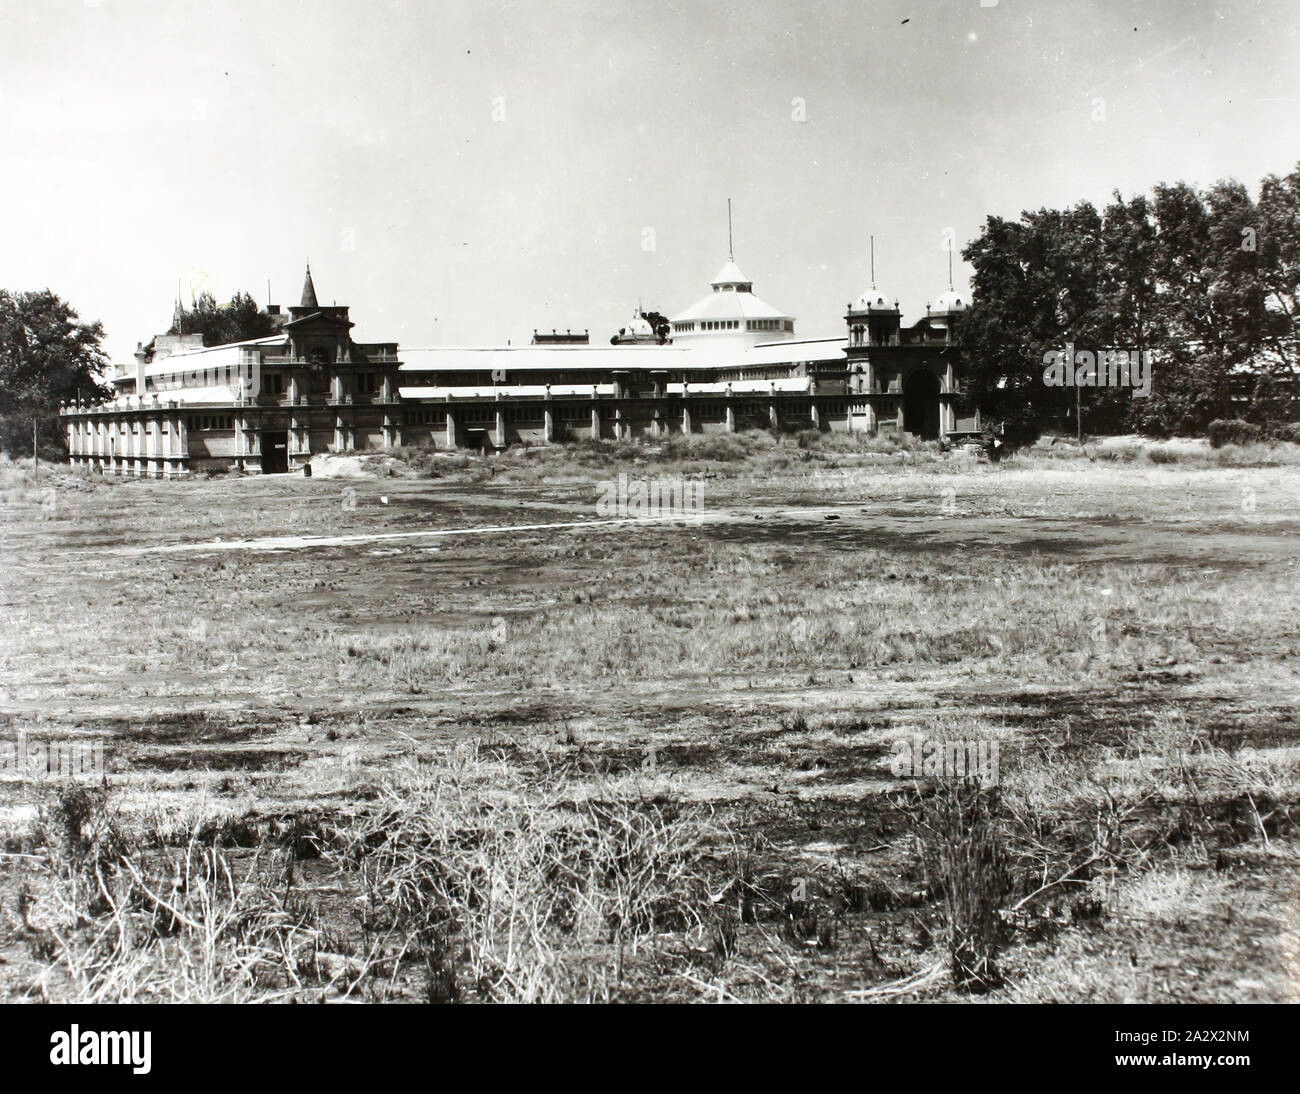 Photograph - Eastern Annexe, Exhibition Building, Melbourne, 1947, Black & white photograph of the eastern annexe of the Exhibition Building from the north west, taken in 1947. The photograph shows the northern side of the eastern annexe that, at this time, housed the White Ensign Club and Australian War Museum. This is one of 959 photographs (or images) of the Exhibition Building collated by the Exhibition Trustees as a 10 volume pictorial history of Stock Photo